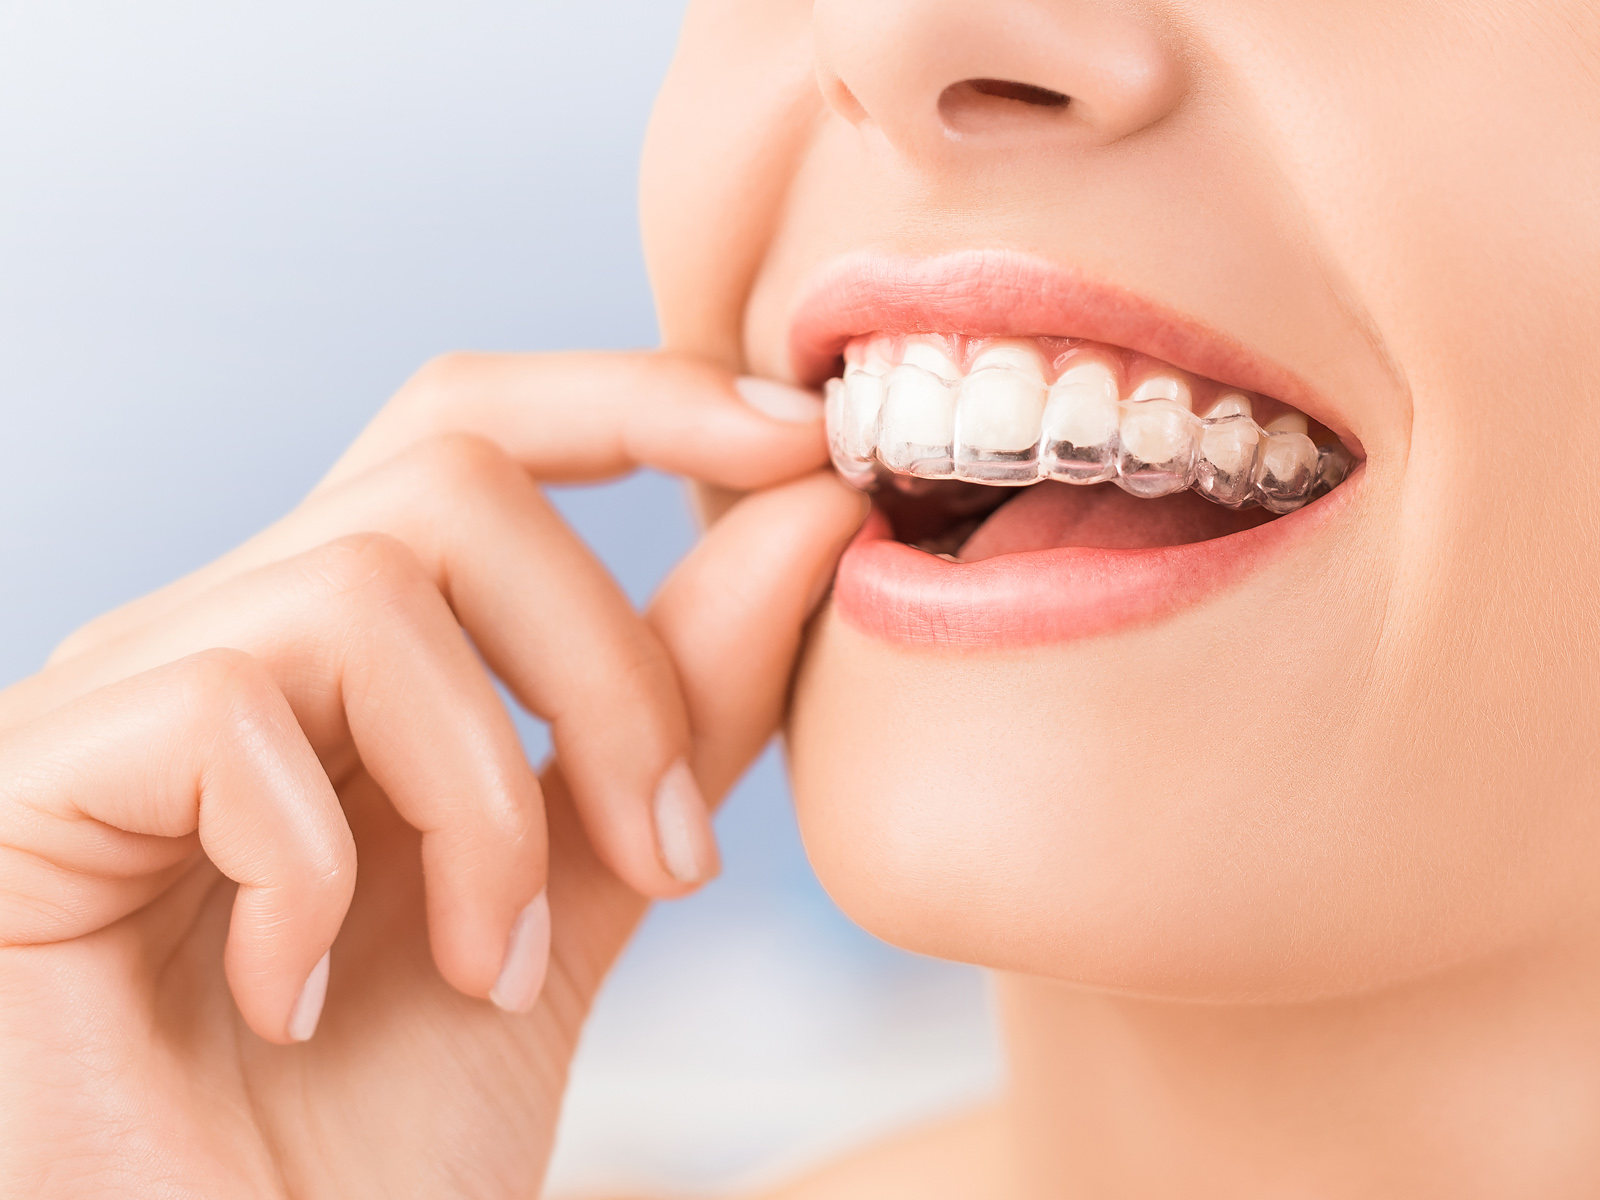 How can you tell if Invisalign is working?